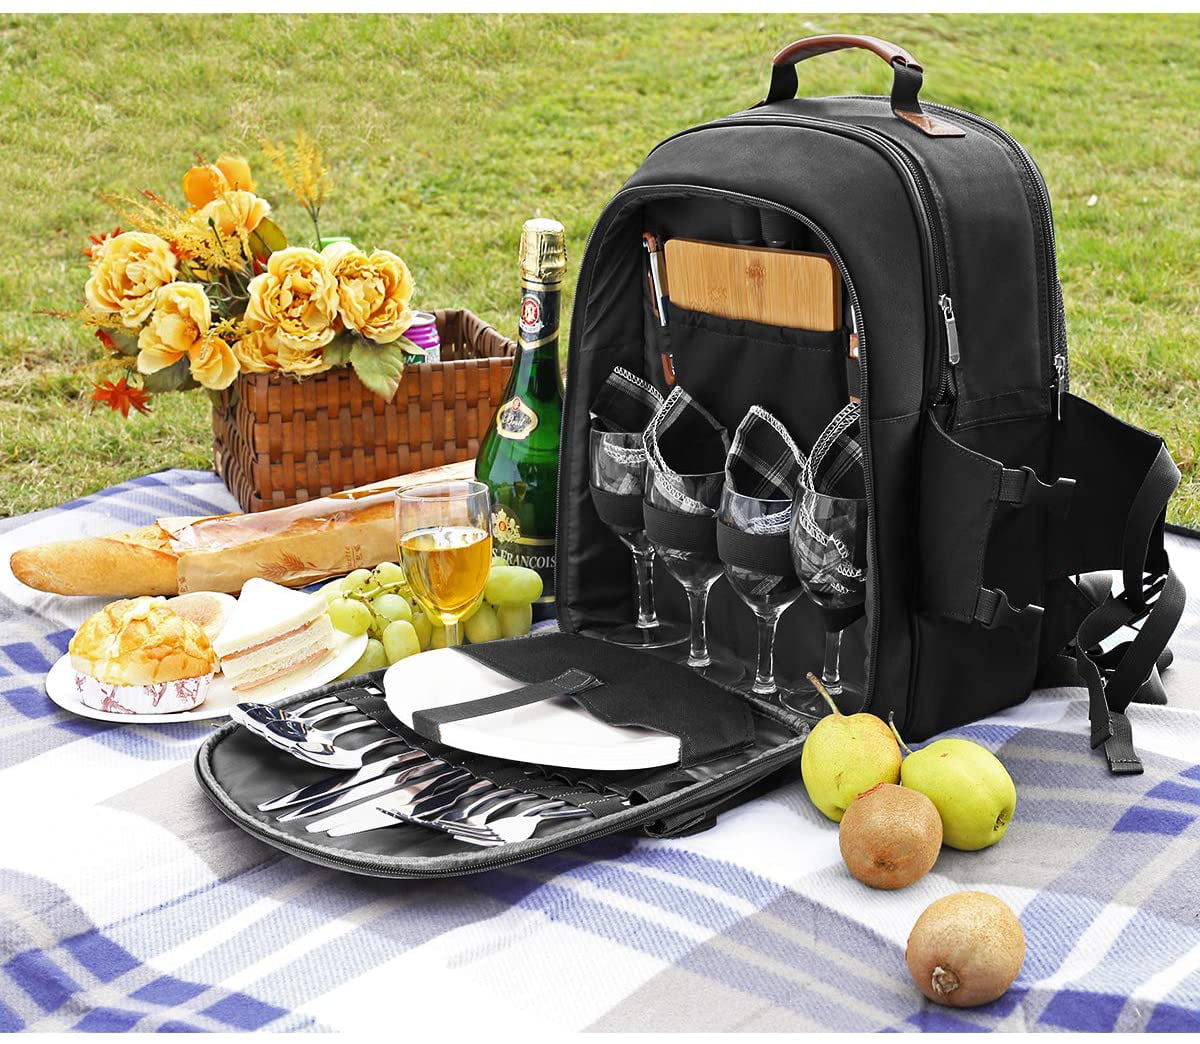 Sunflora Picnic Backpack for 4 Person Set Pack with Insulated 